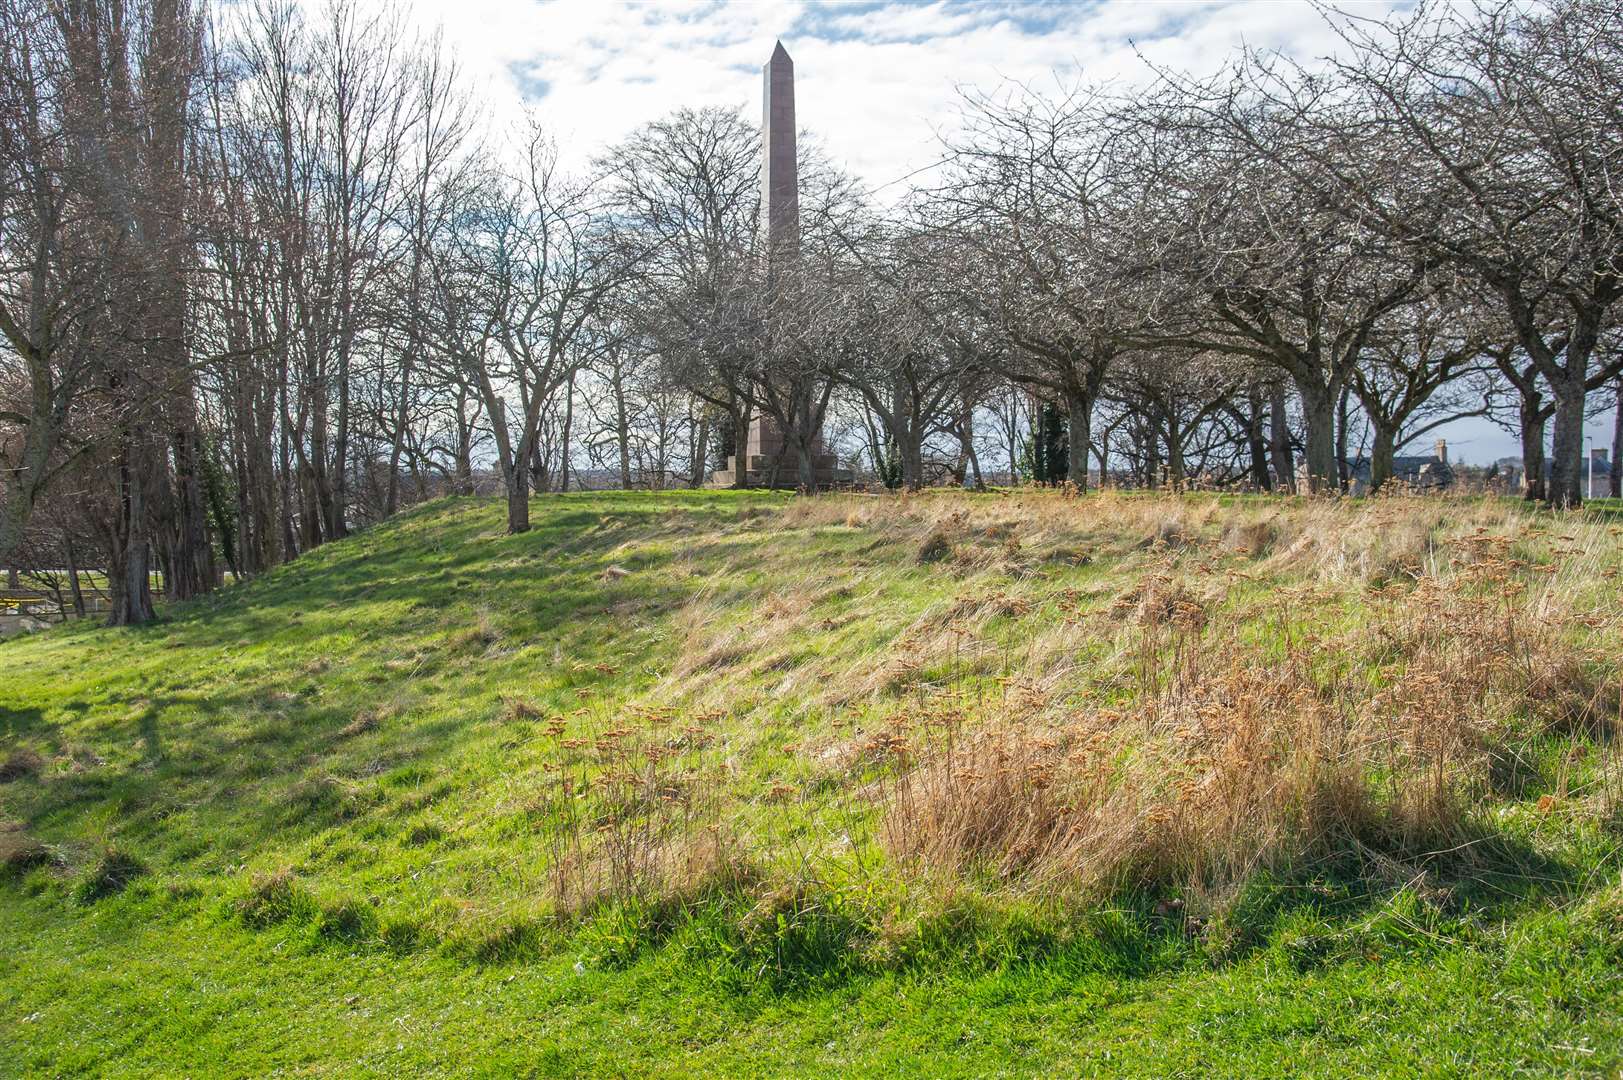 The Thomson Memorial, AKA The Needle, is another existing wildflower site.